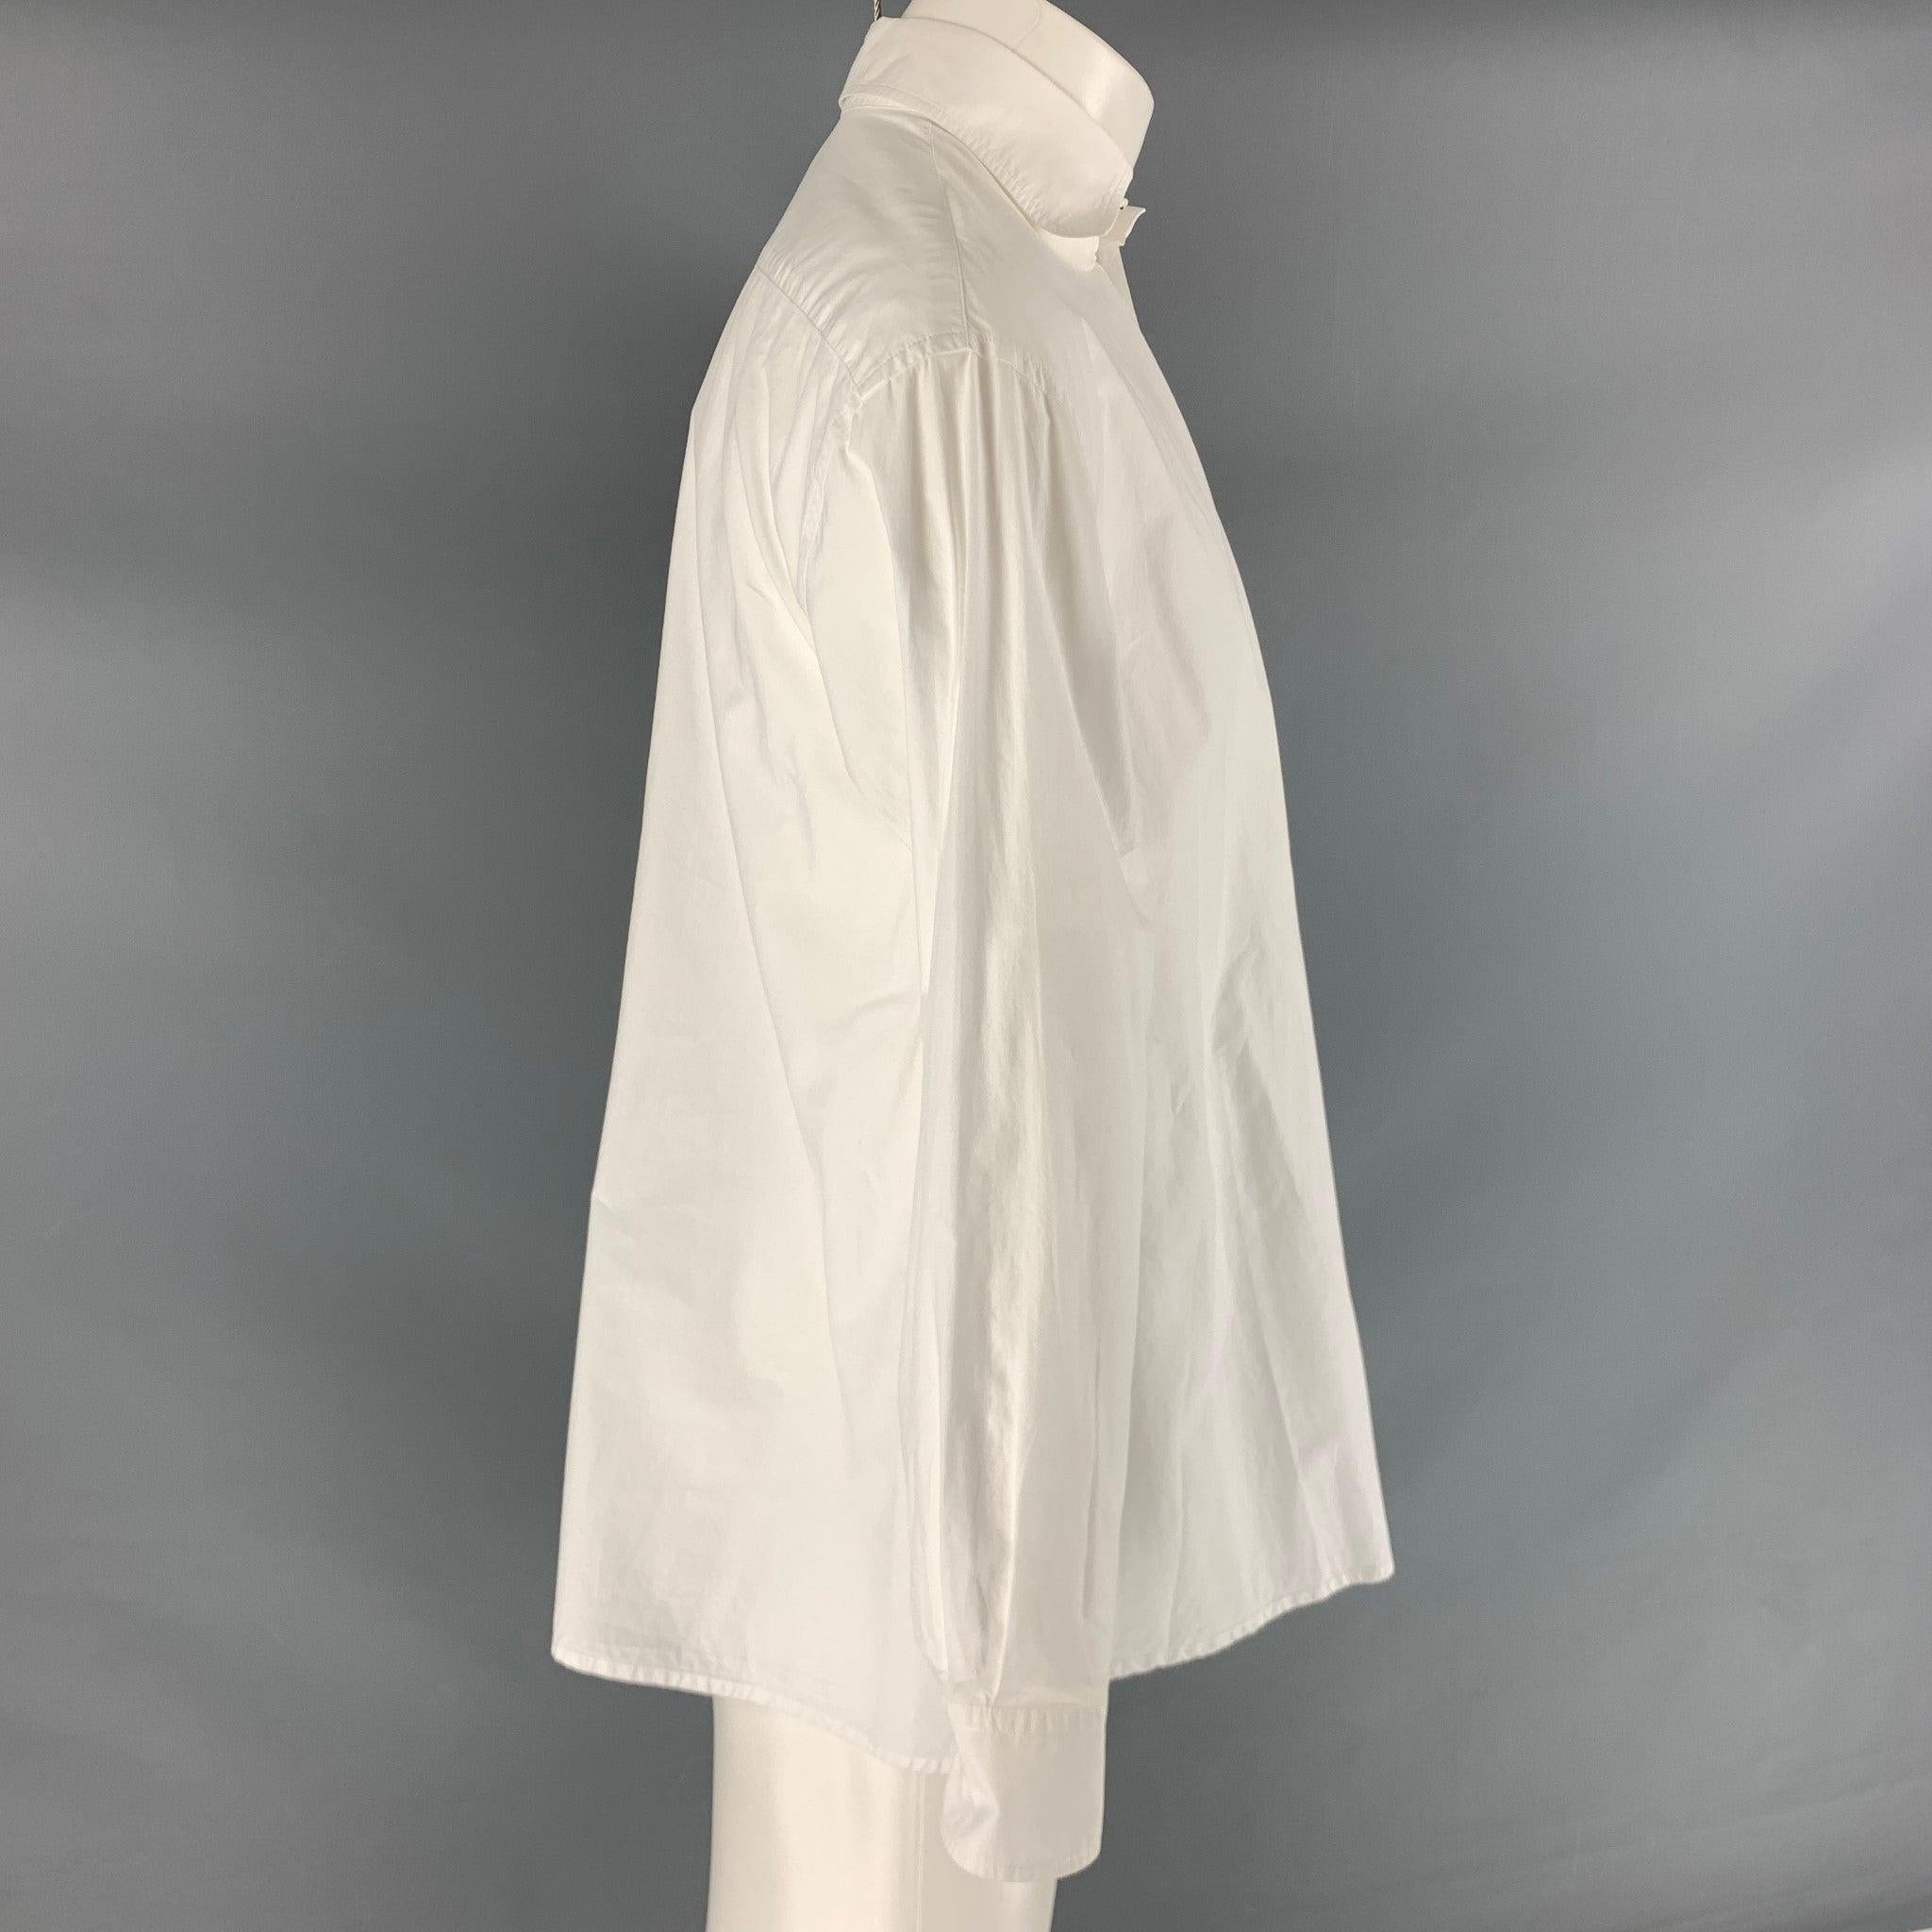 TOMAS MAIER long sleeve shirt comes in a white cotton featuring a straight collar, trapeze cut, and buttoned cuffs. Made in Italy.
Excellent Pre-Owned Condition. 

Marked:   M
 

Measurements: 
 
Shoulder: 20.5 inches Chest: 46 inches Sleeve: 22